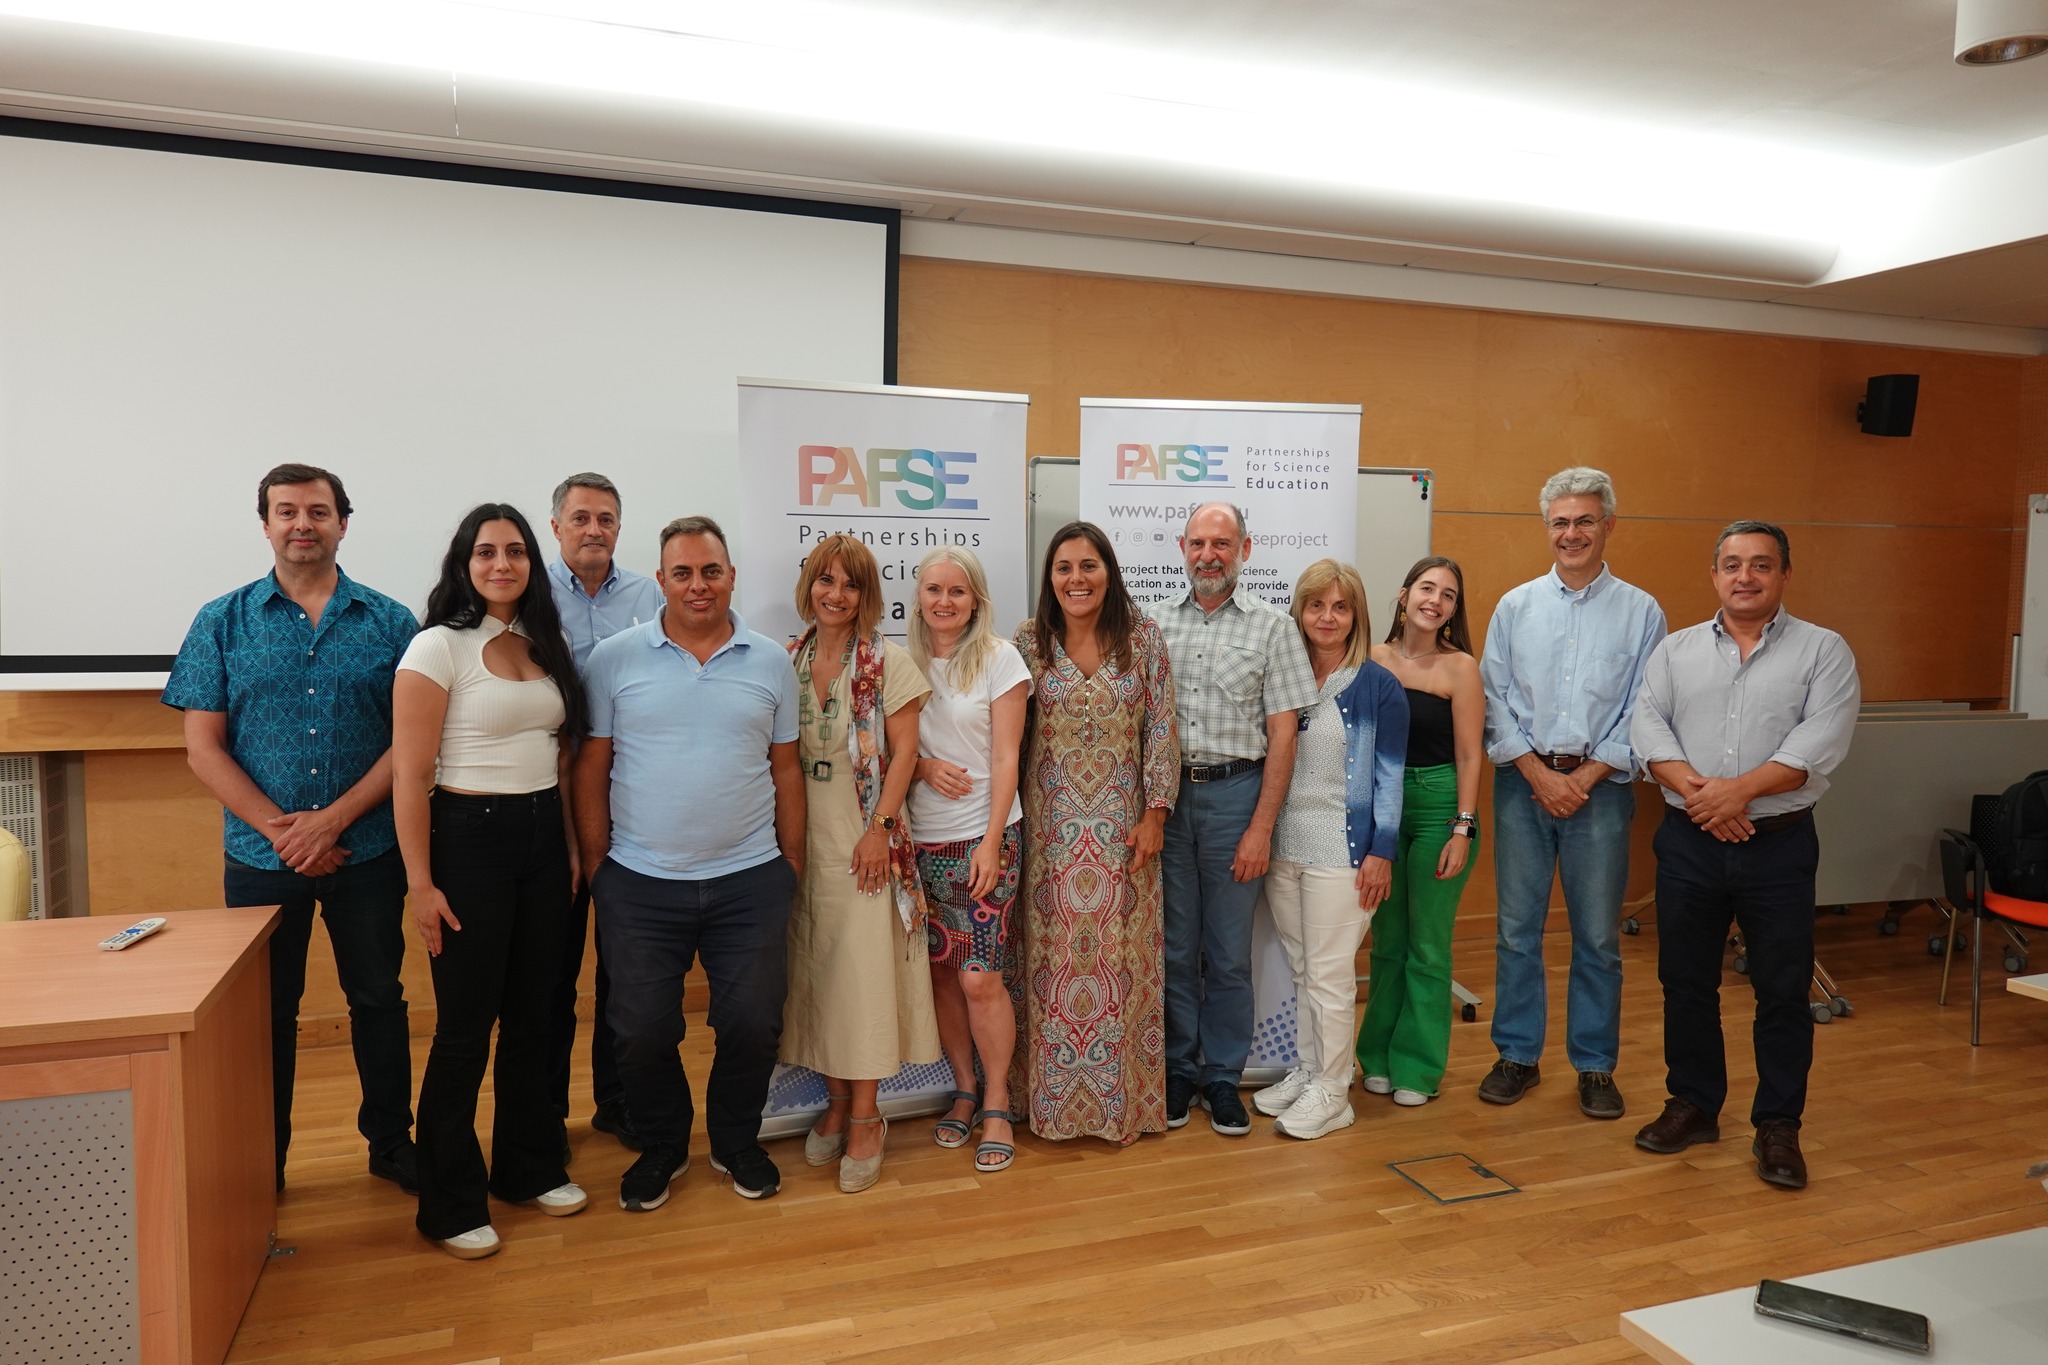 Annual meeting of PAFSE Consortium Members in Poznań, Poland